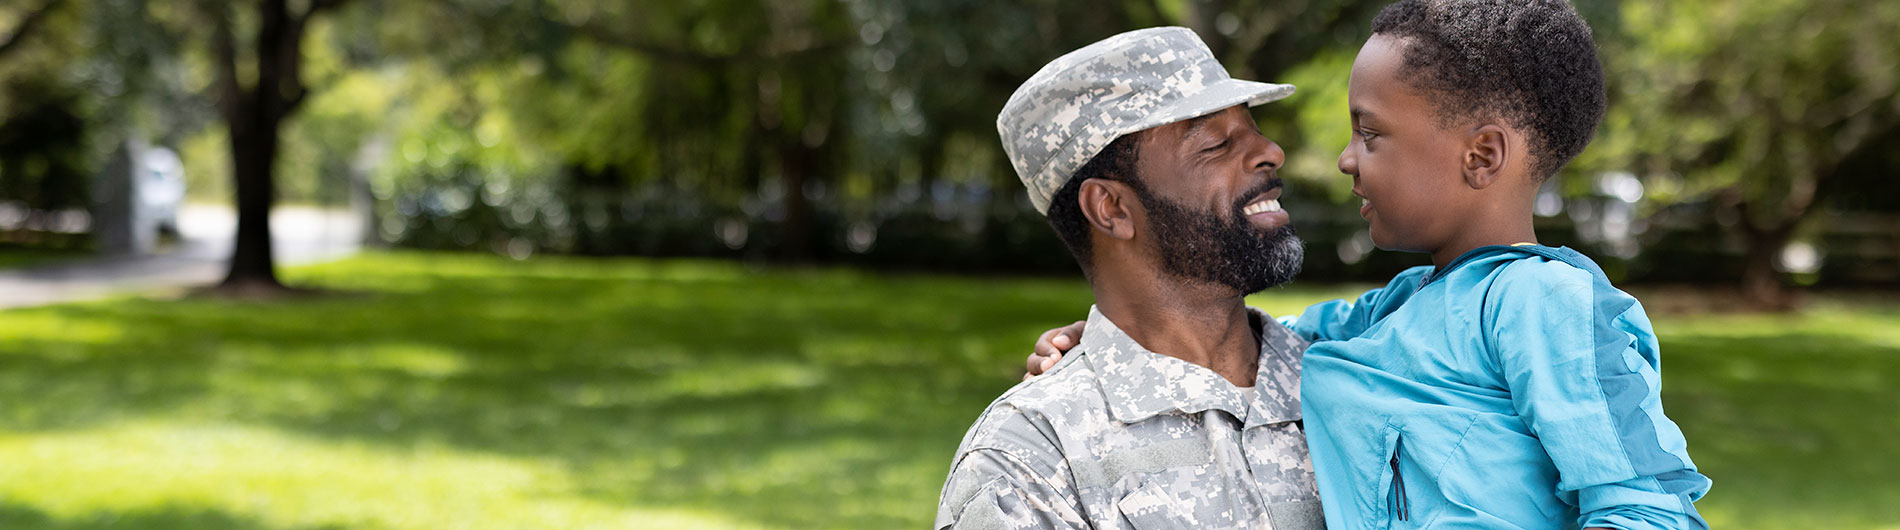 Black Veteran in Army fatigues carrying his son and smiling at him